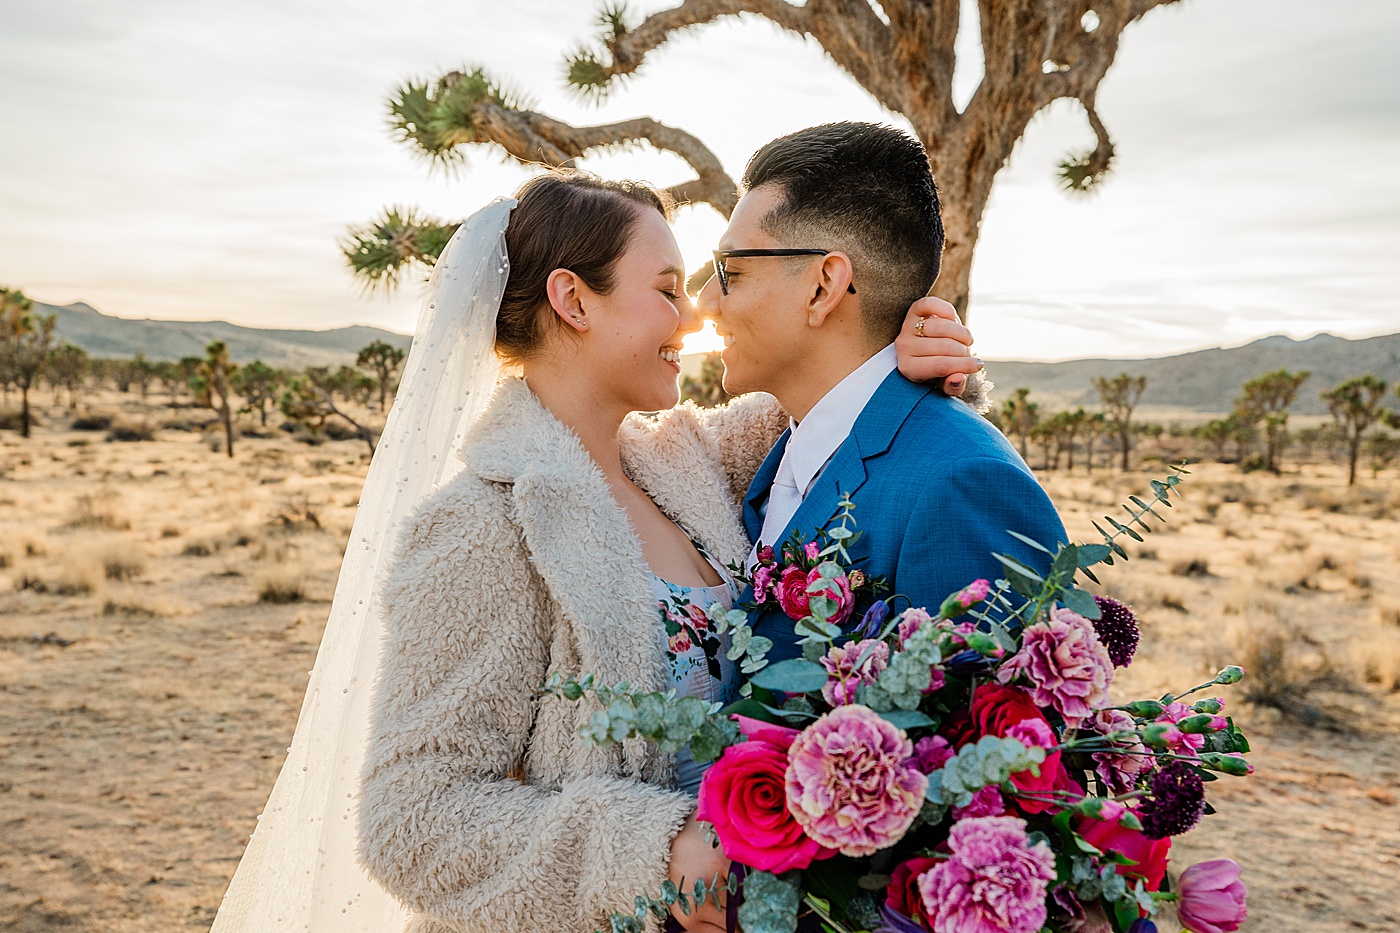 Joshua tree elopement at sunset. Bride and groom kissing.